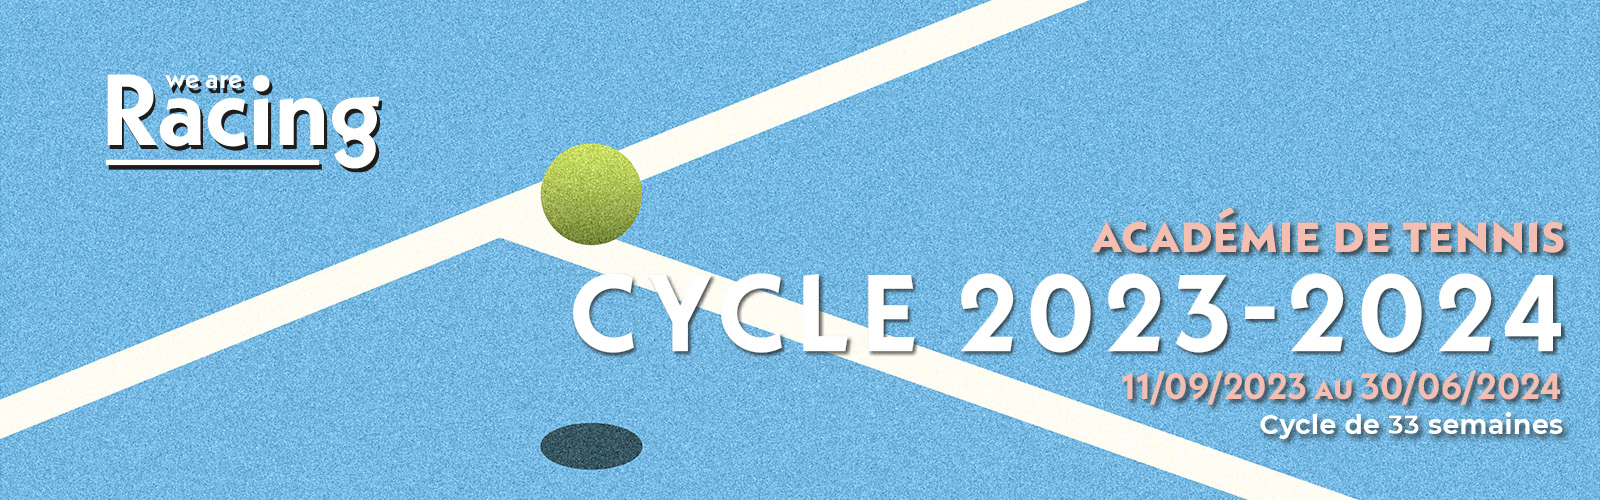 Tennis Cycle 2023-24 